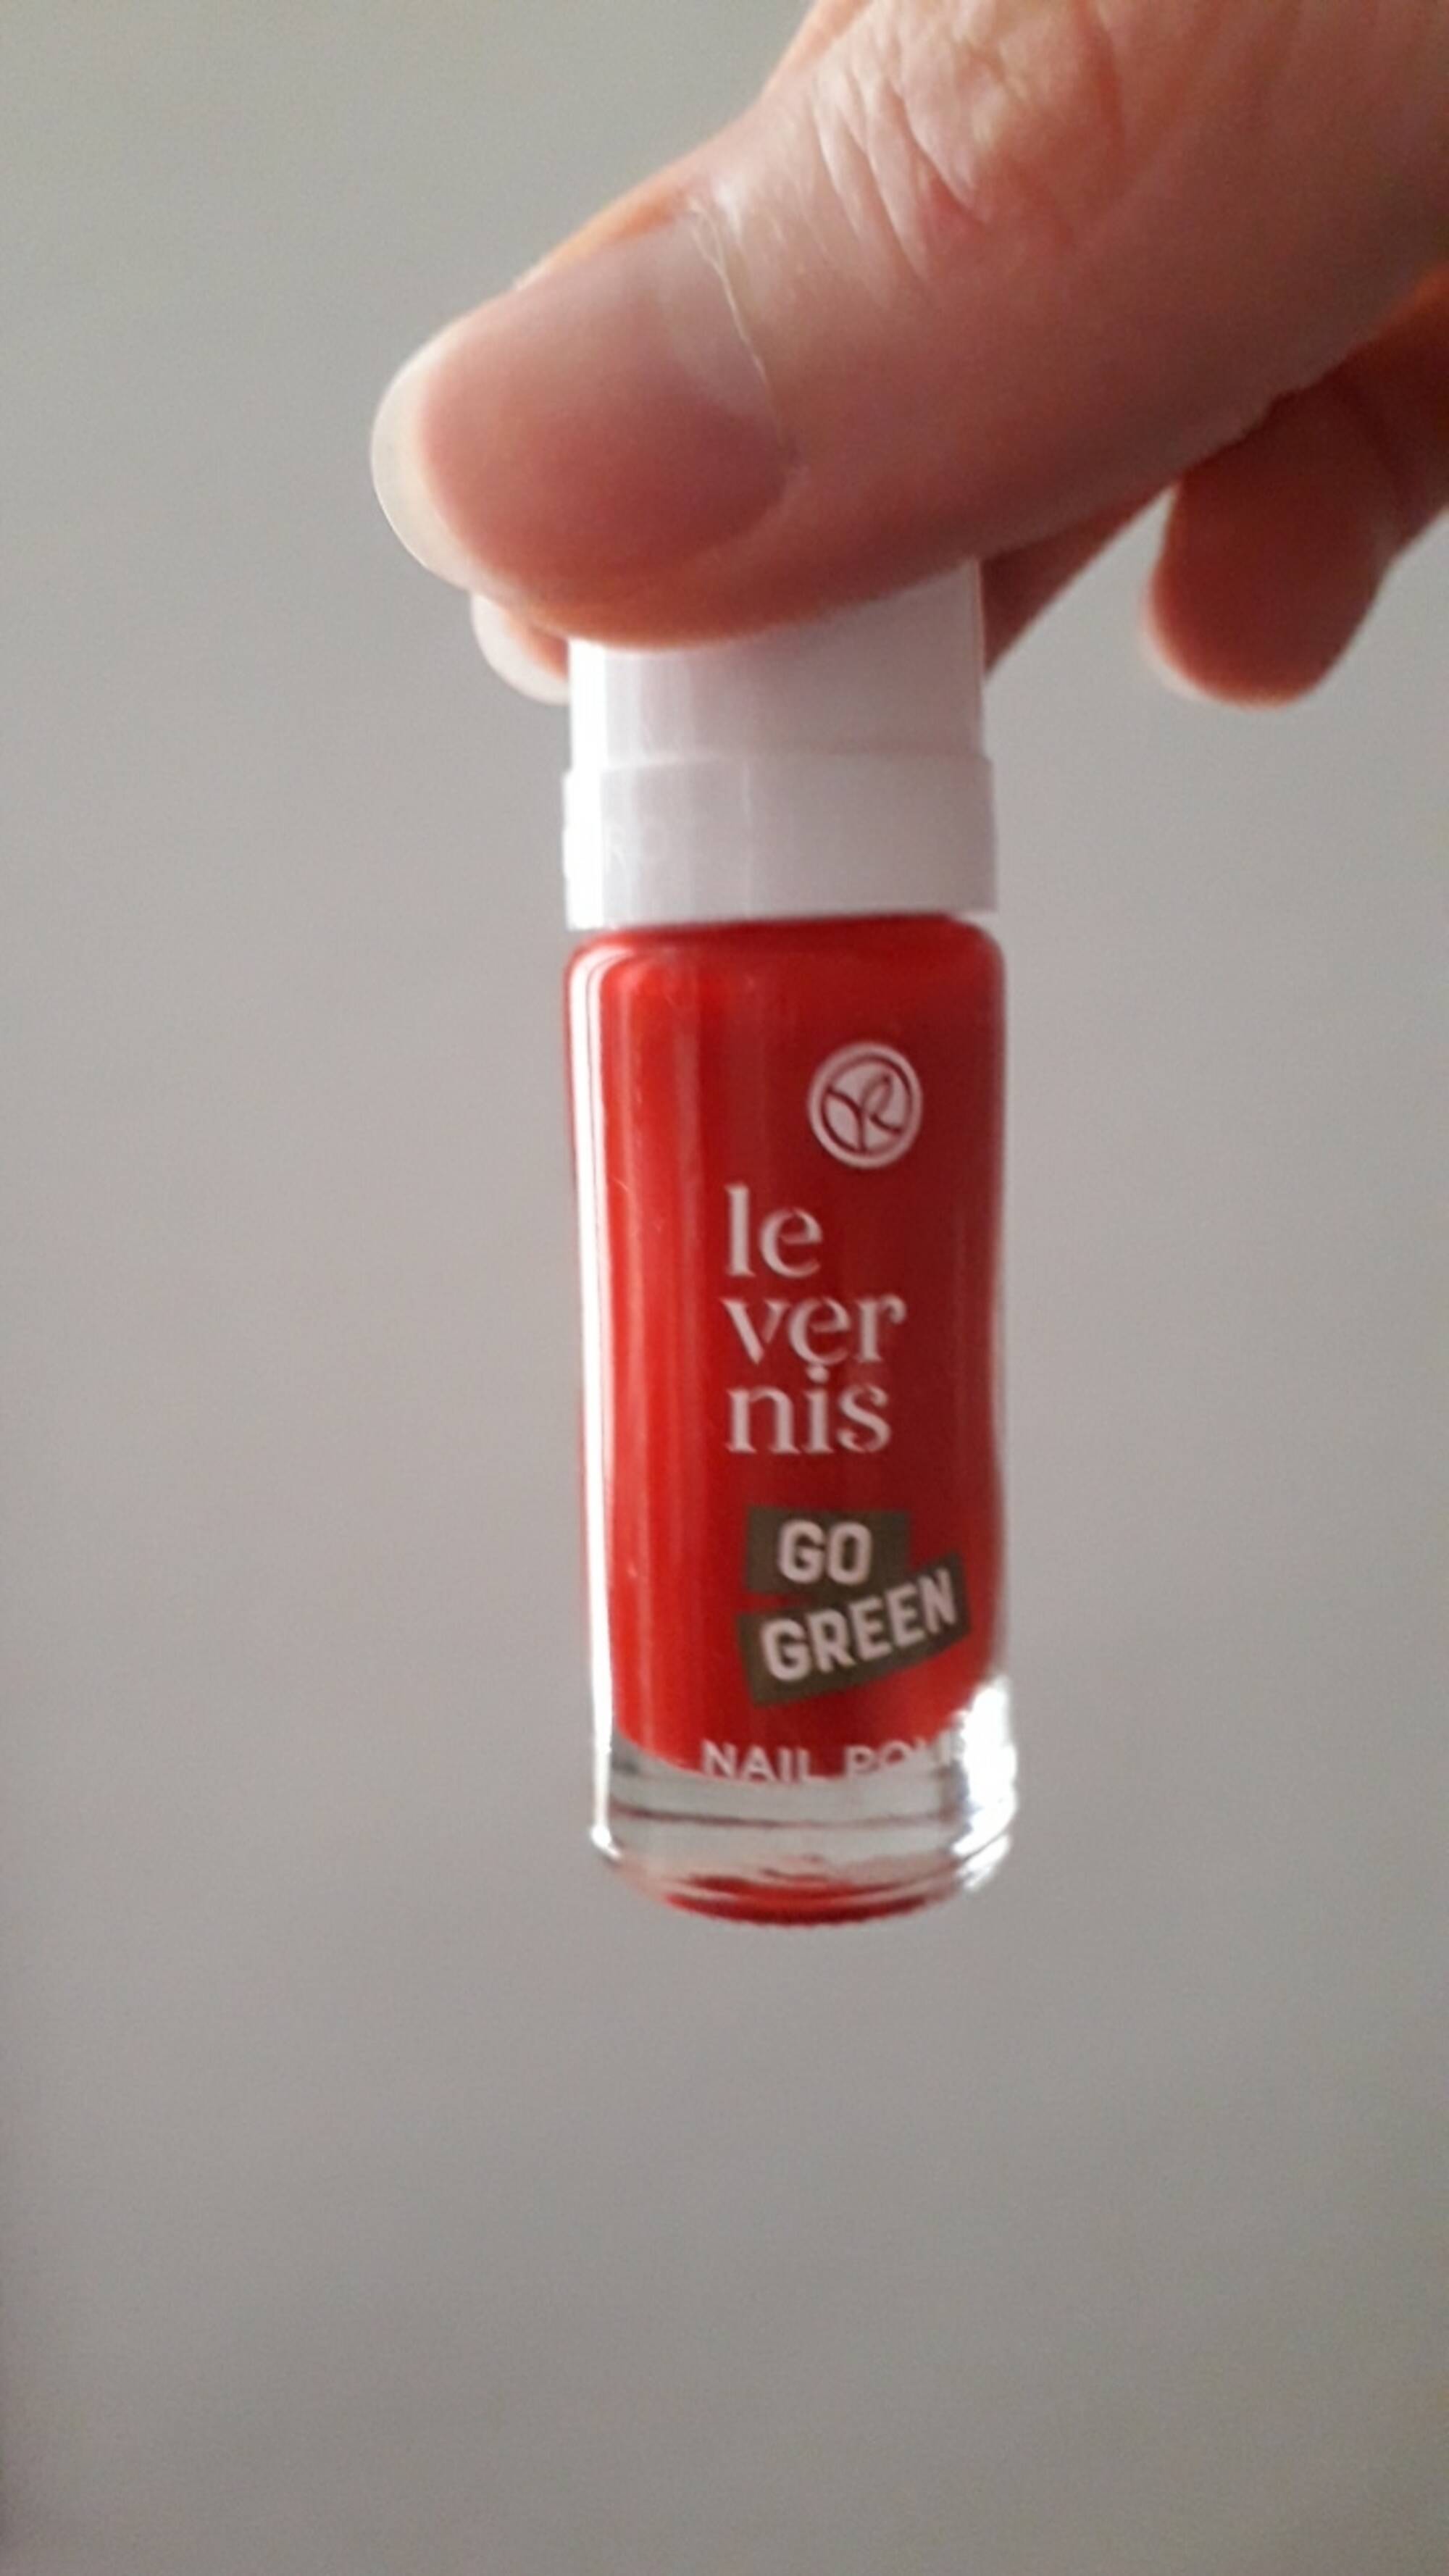 YVES ROCHER - Go green - Le vernis 23 rouge amaryllis